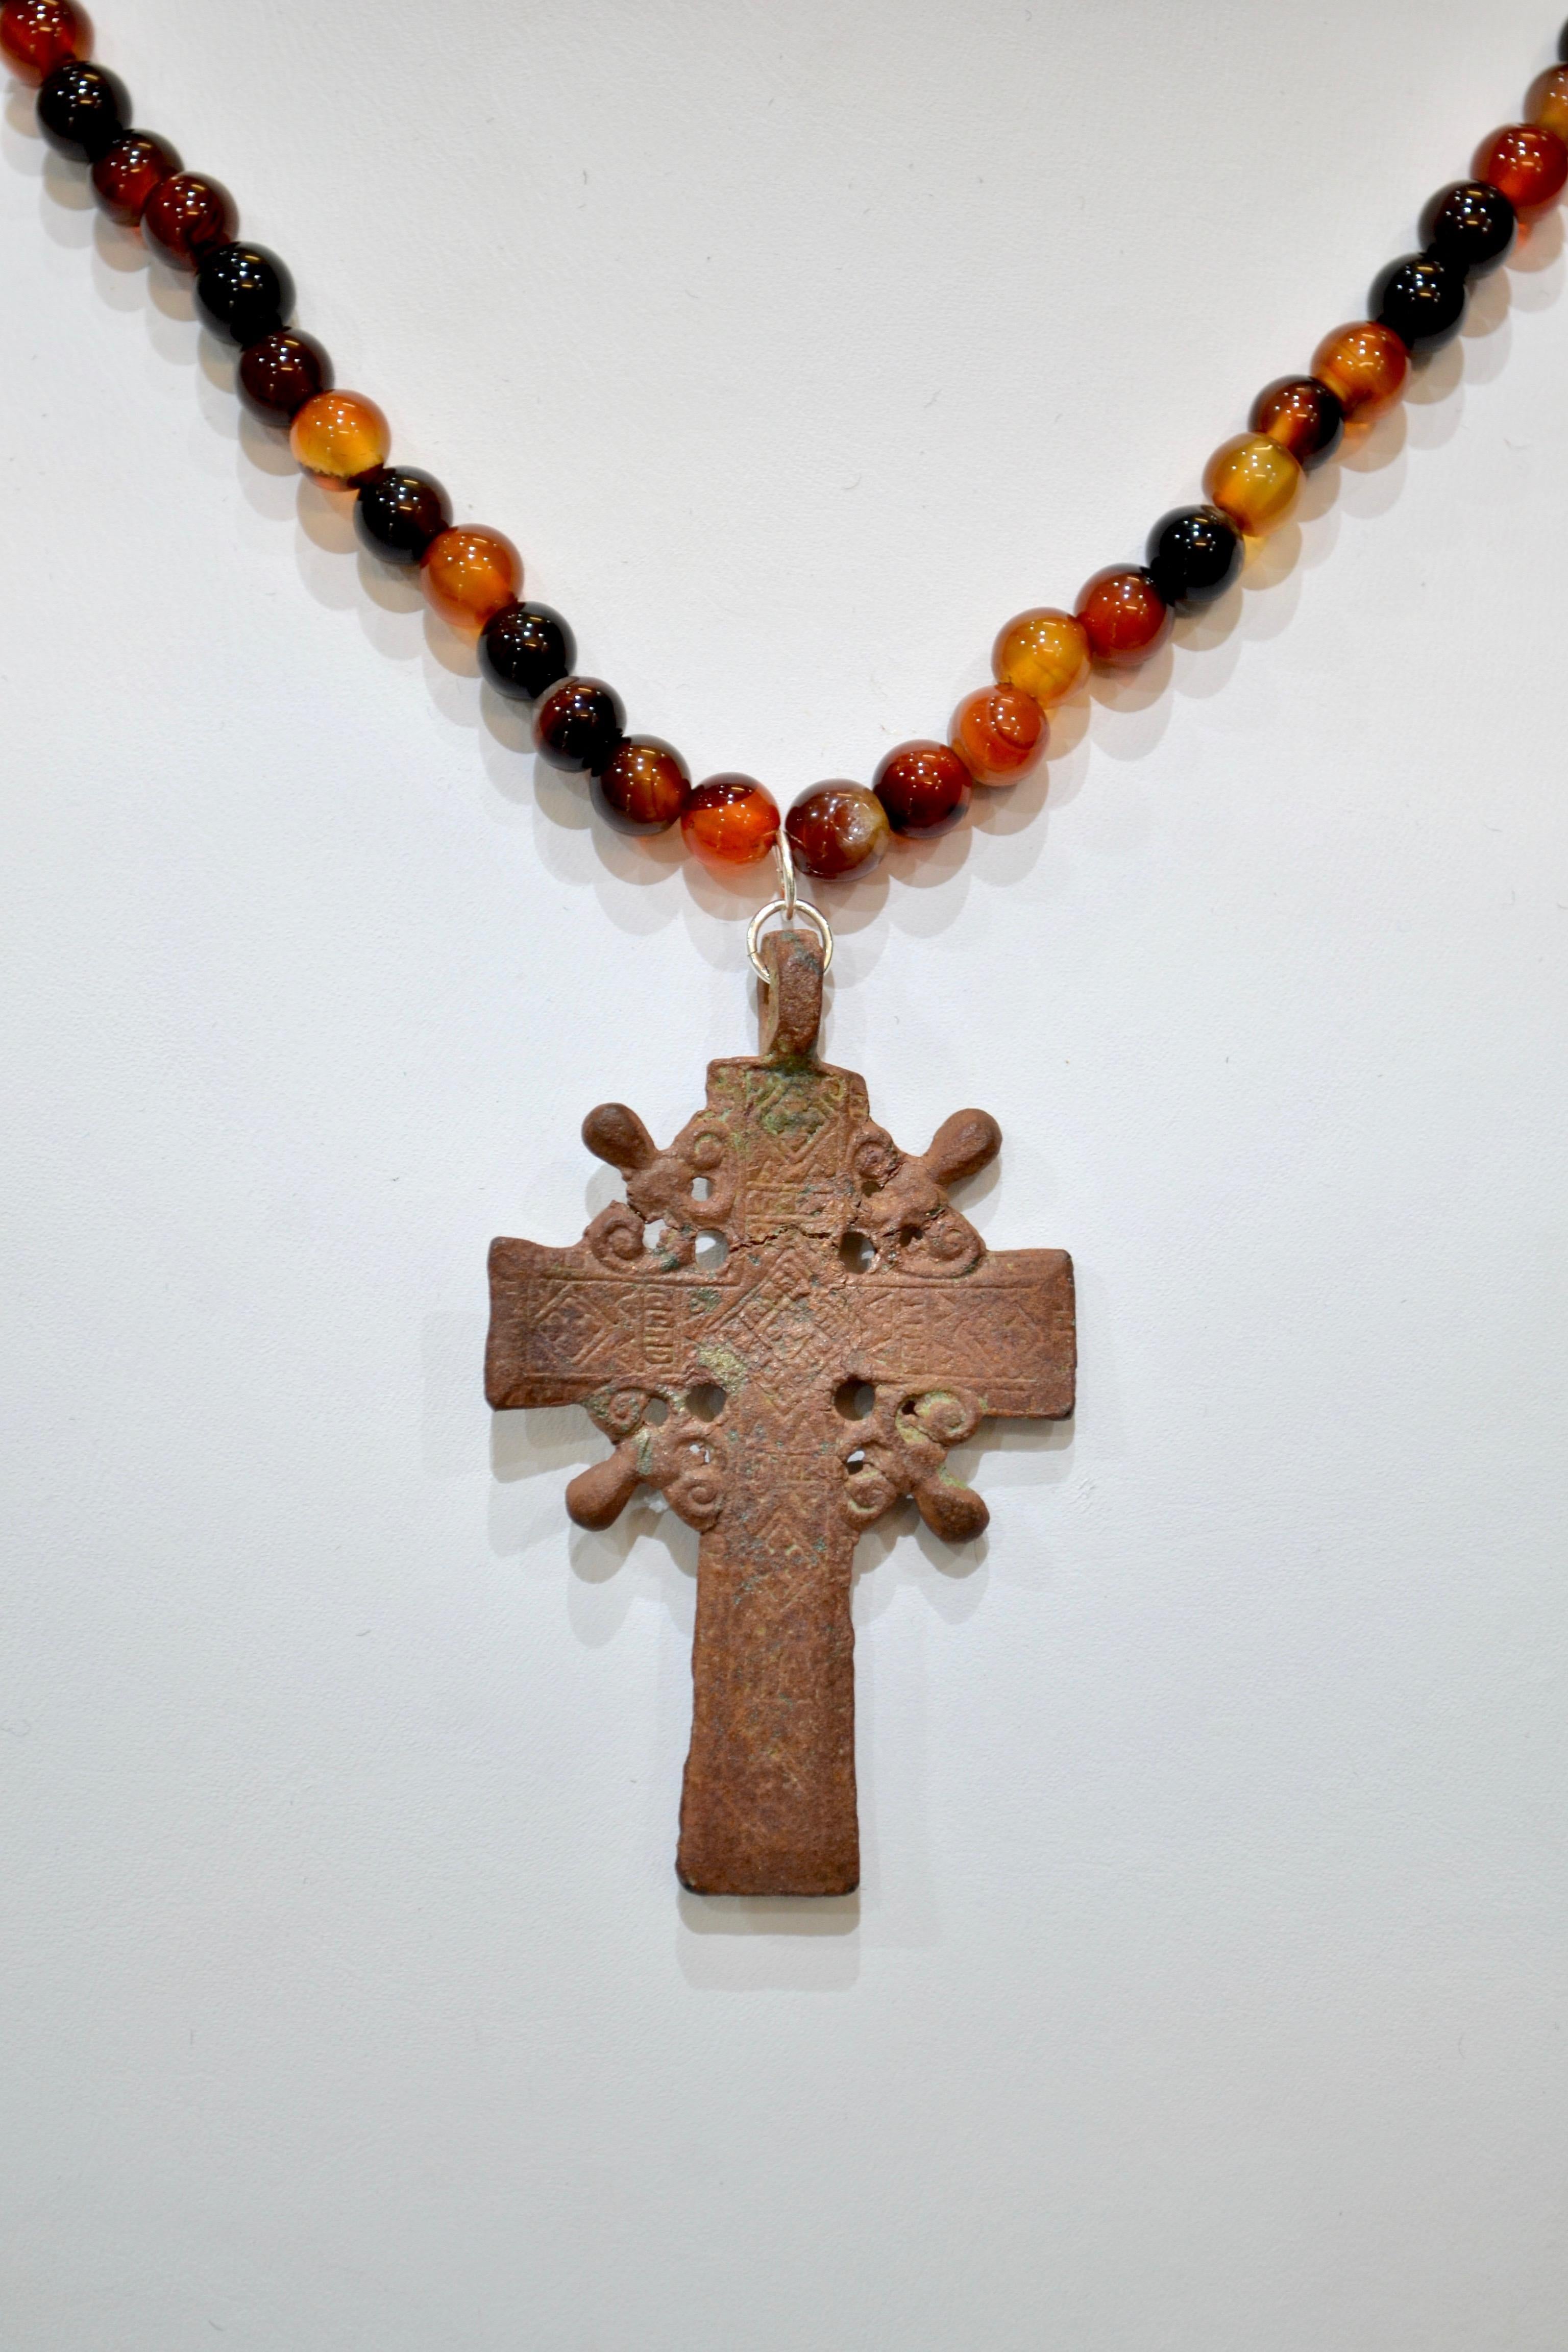 Late Medieval Bronze Radiate Cross Pendant. Professionally cleaned and polished to show original details. Obtained from an old British collection, acquired from the L.C.F. (London) Mounted on a beaded agate necklace 